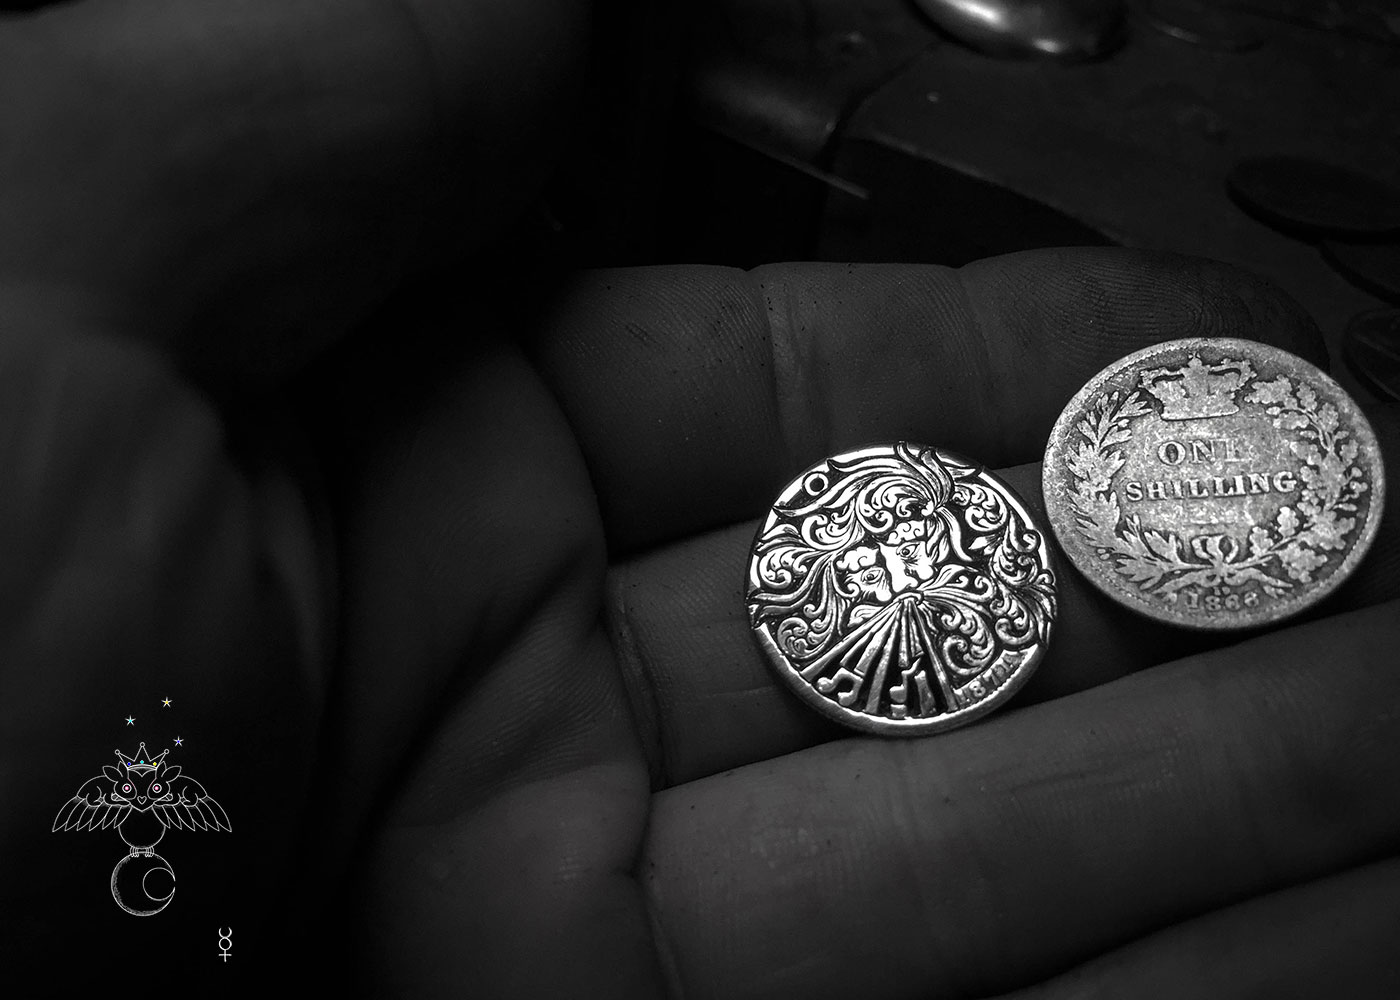 Aeolus the god of wind hand cut coin necklace